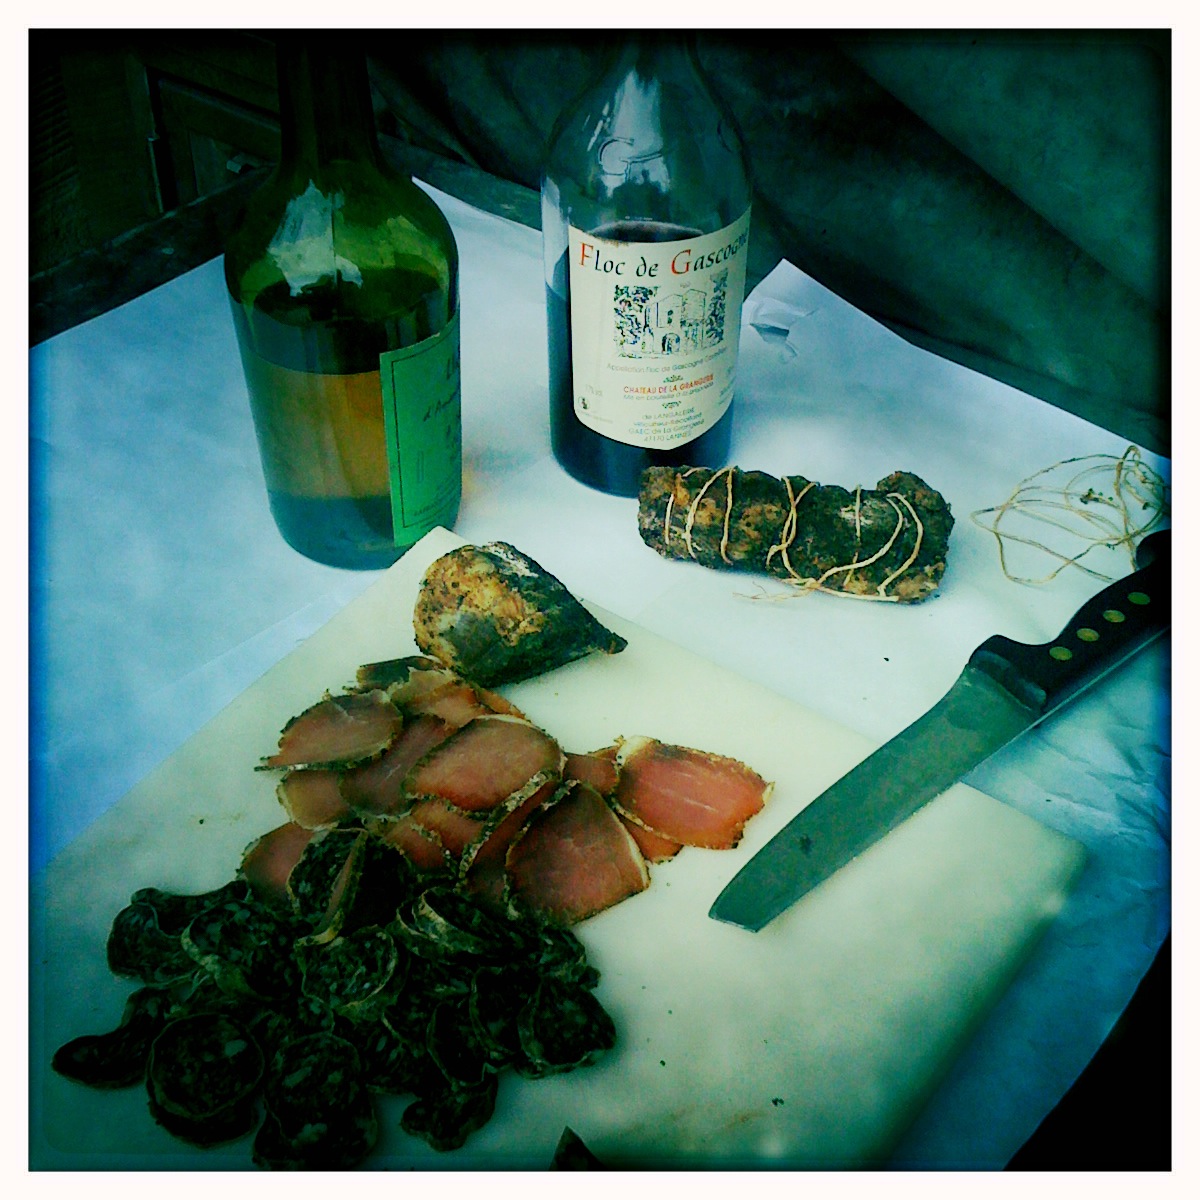 Gascony France and Charcuterie